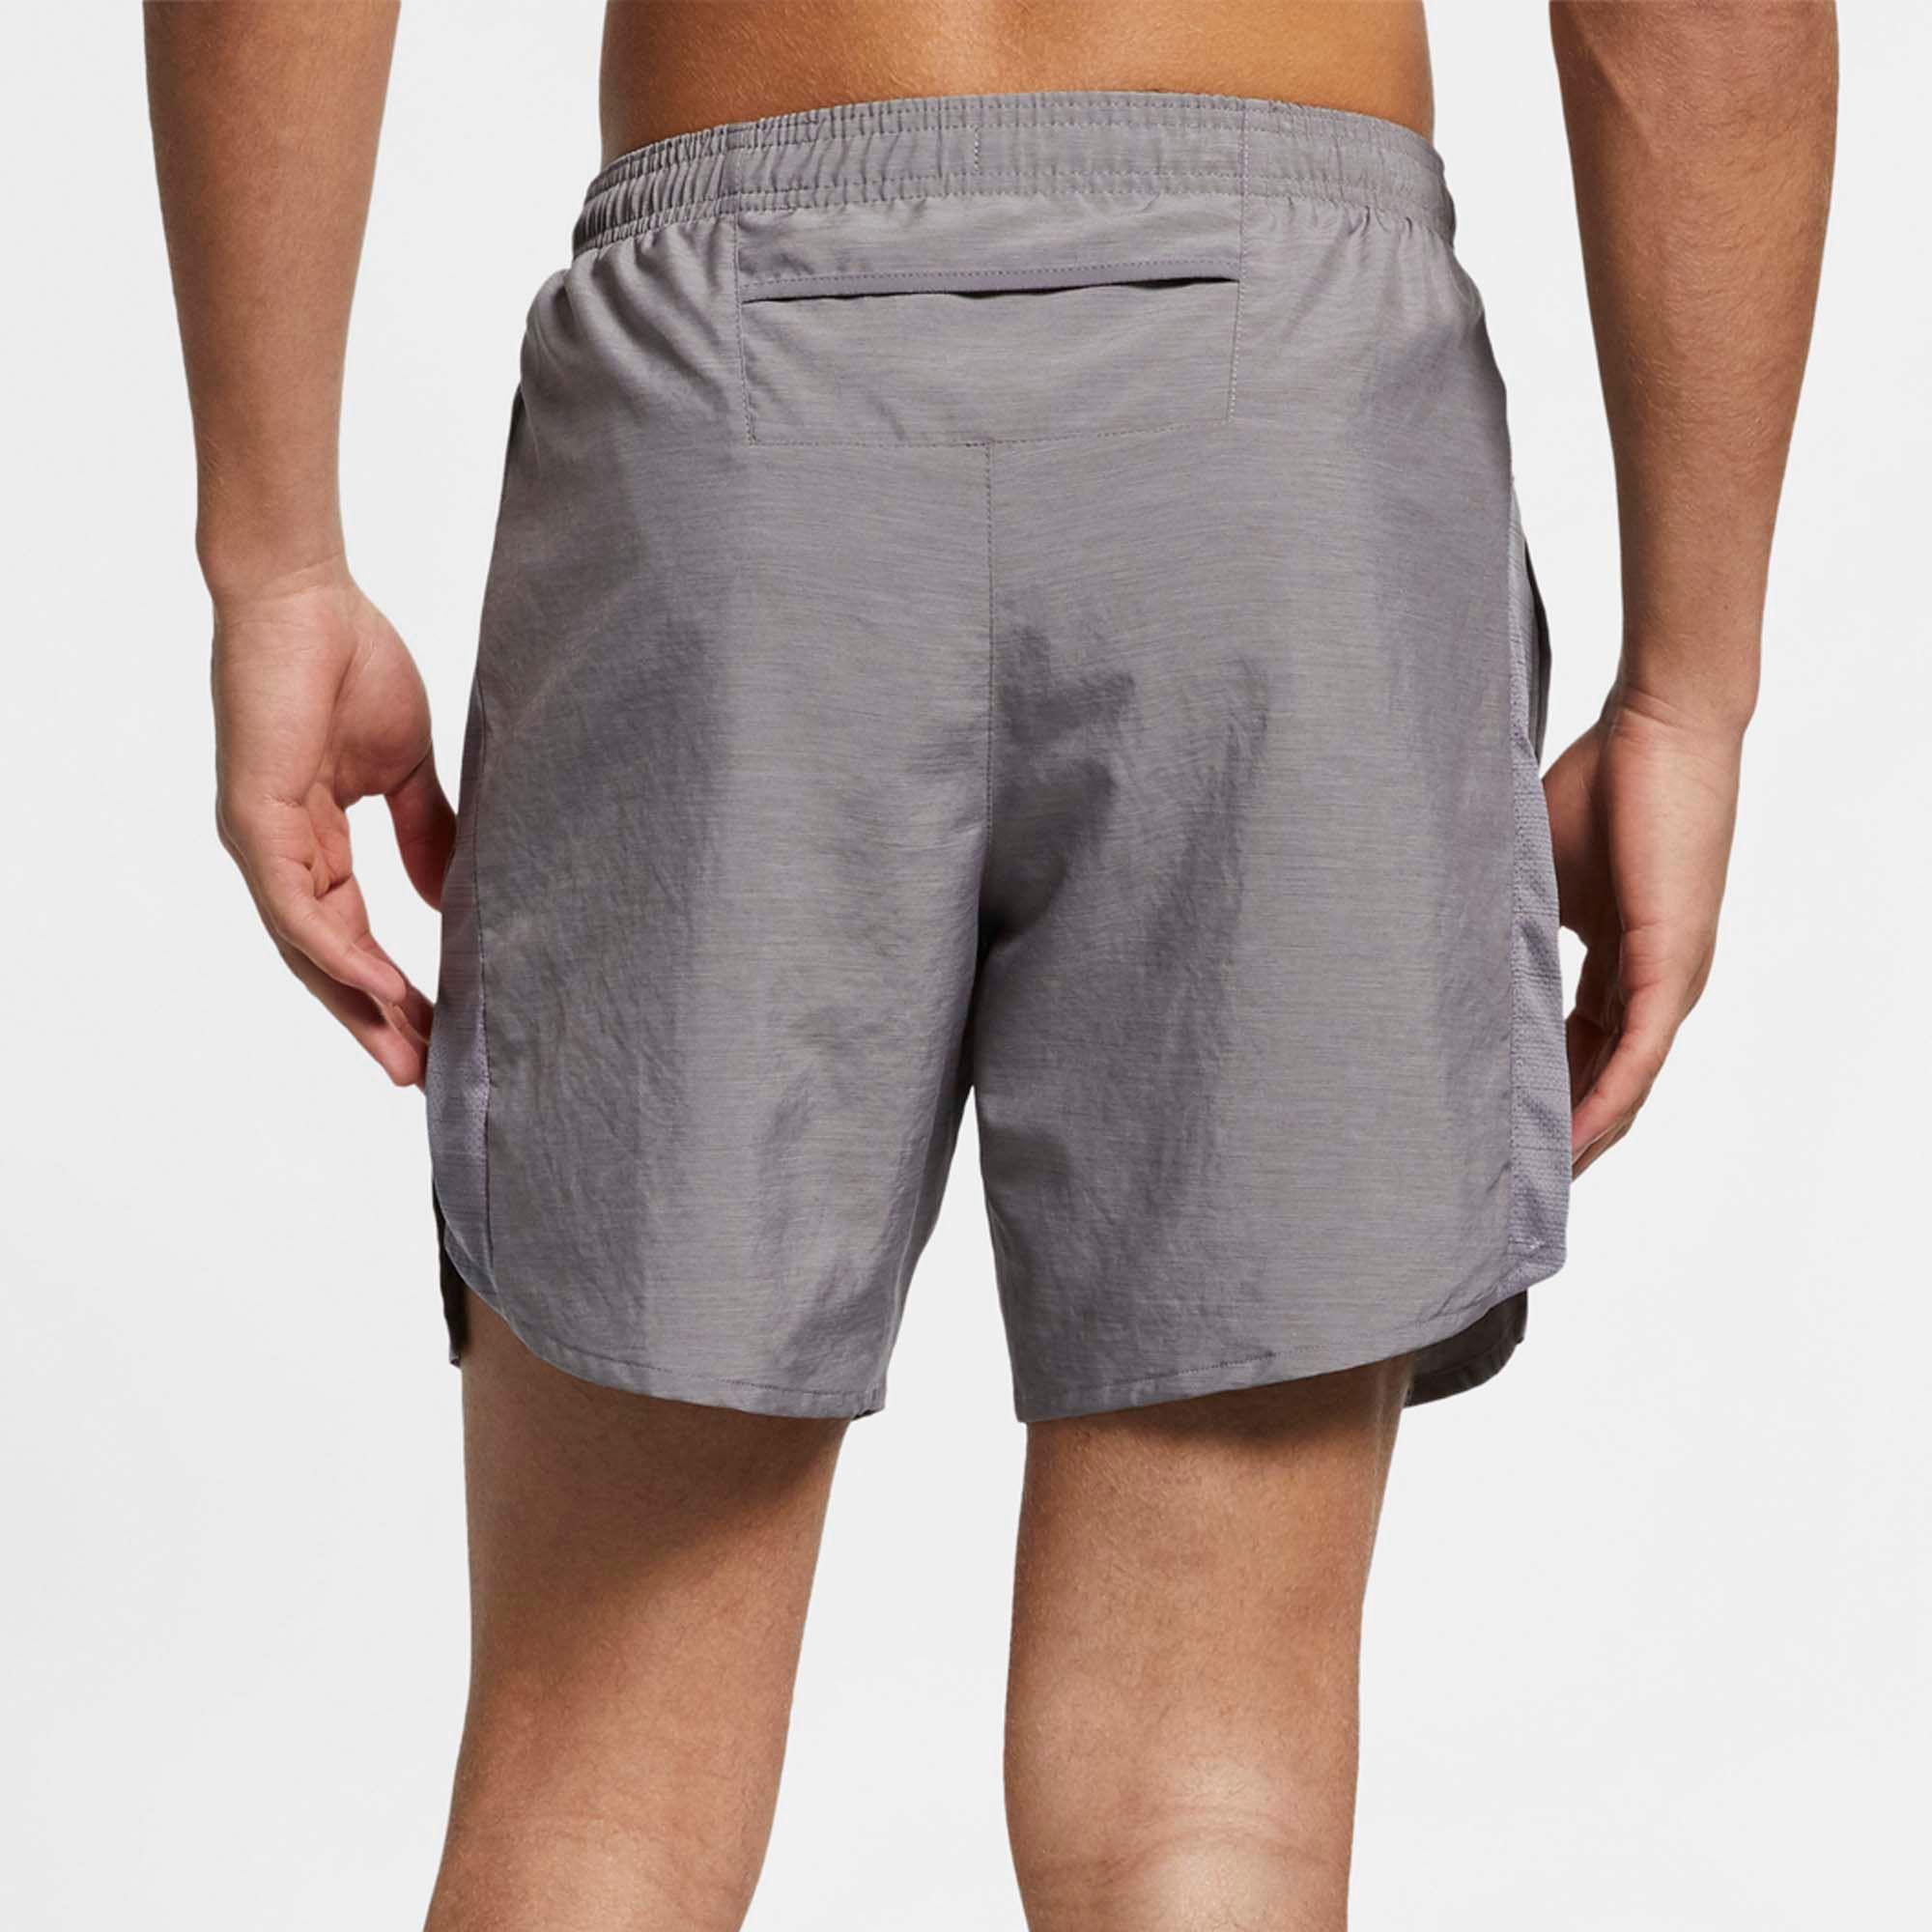 Nike Synthetic Challenger 7 Inch Shorts In Grey in Gray for Men - Lyst